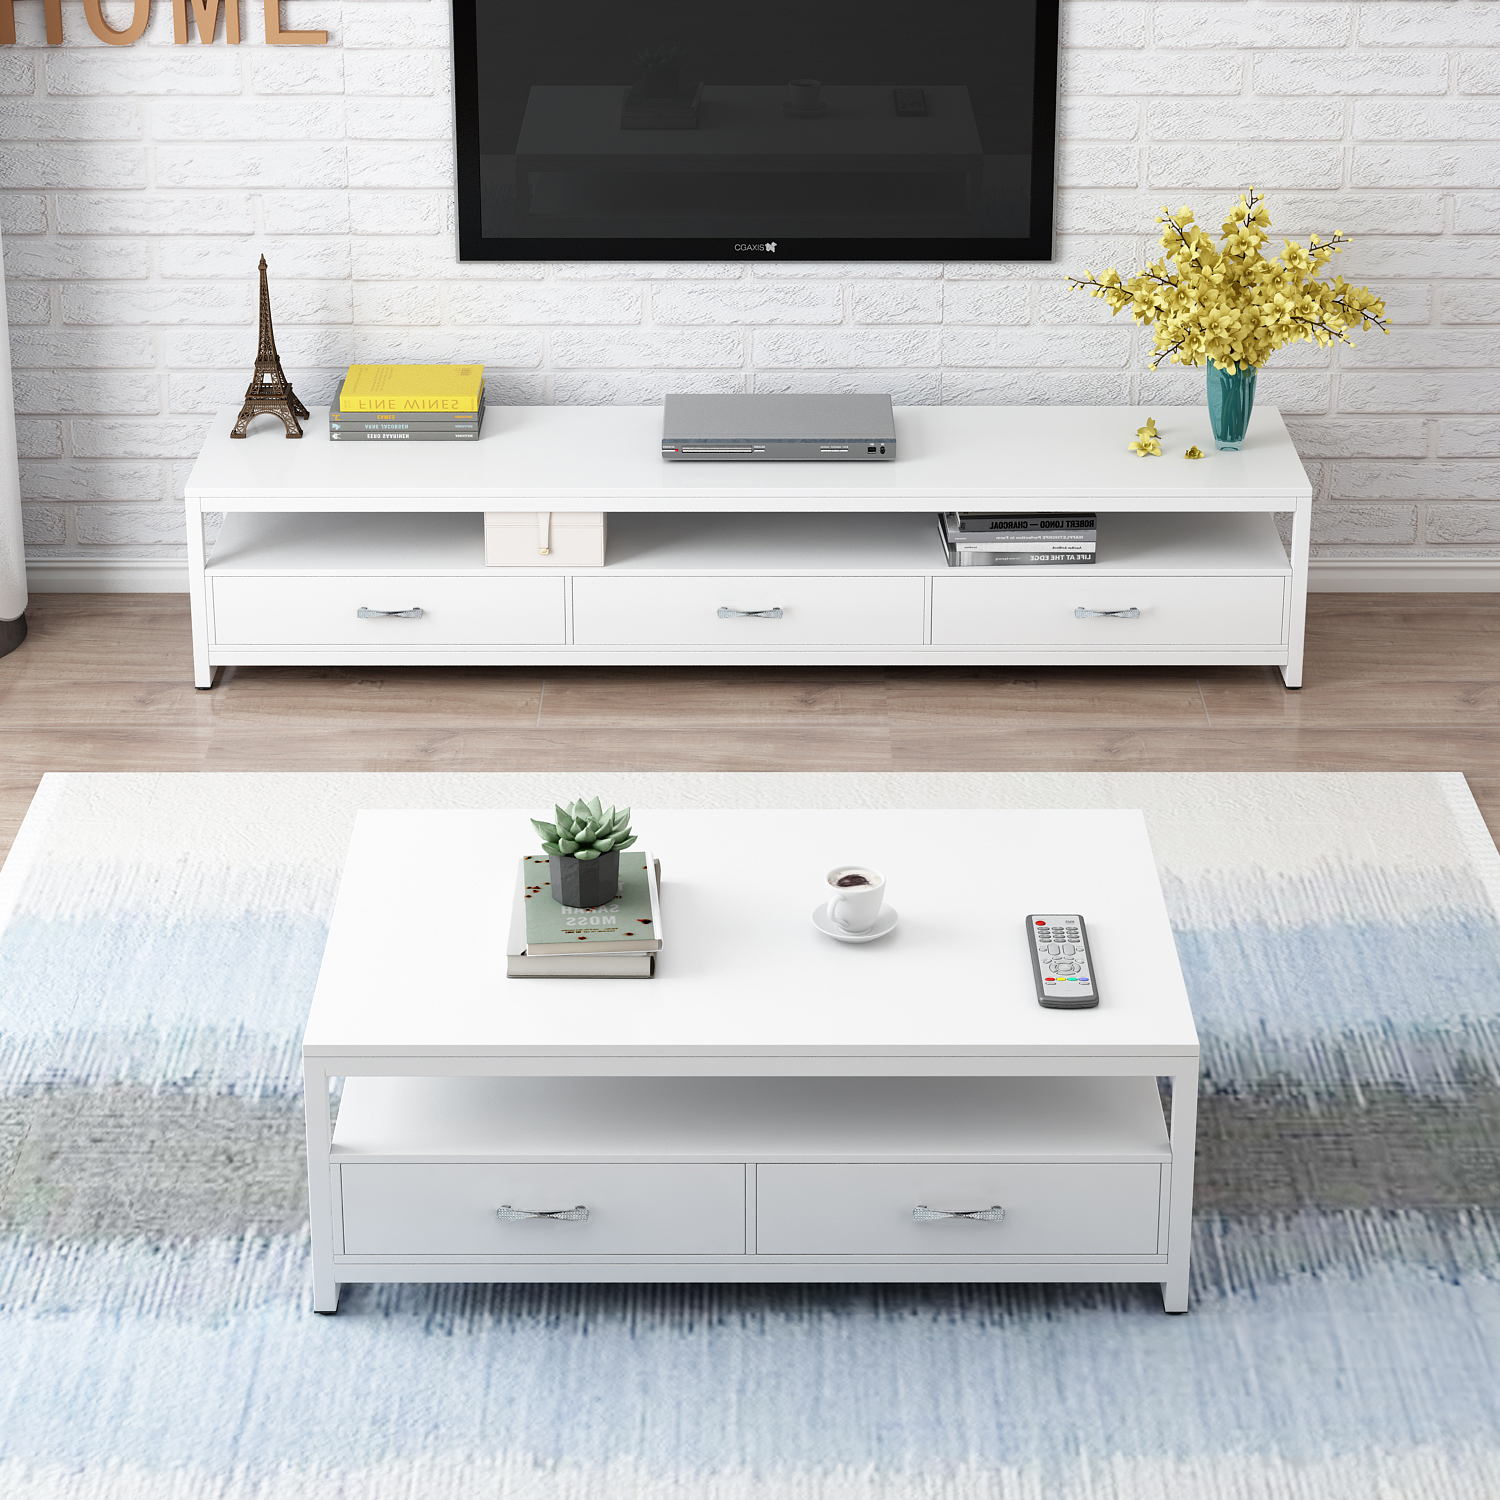 2 Piece Set Athena Coffee Table Tv Cabinet With Drawers White